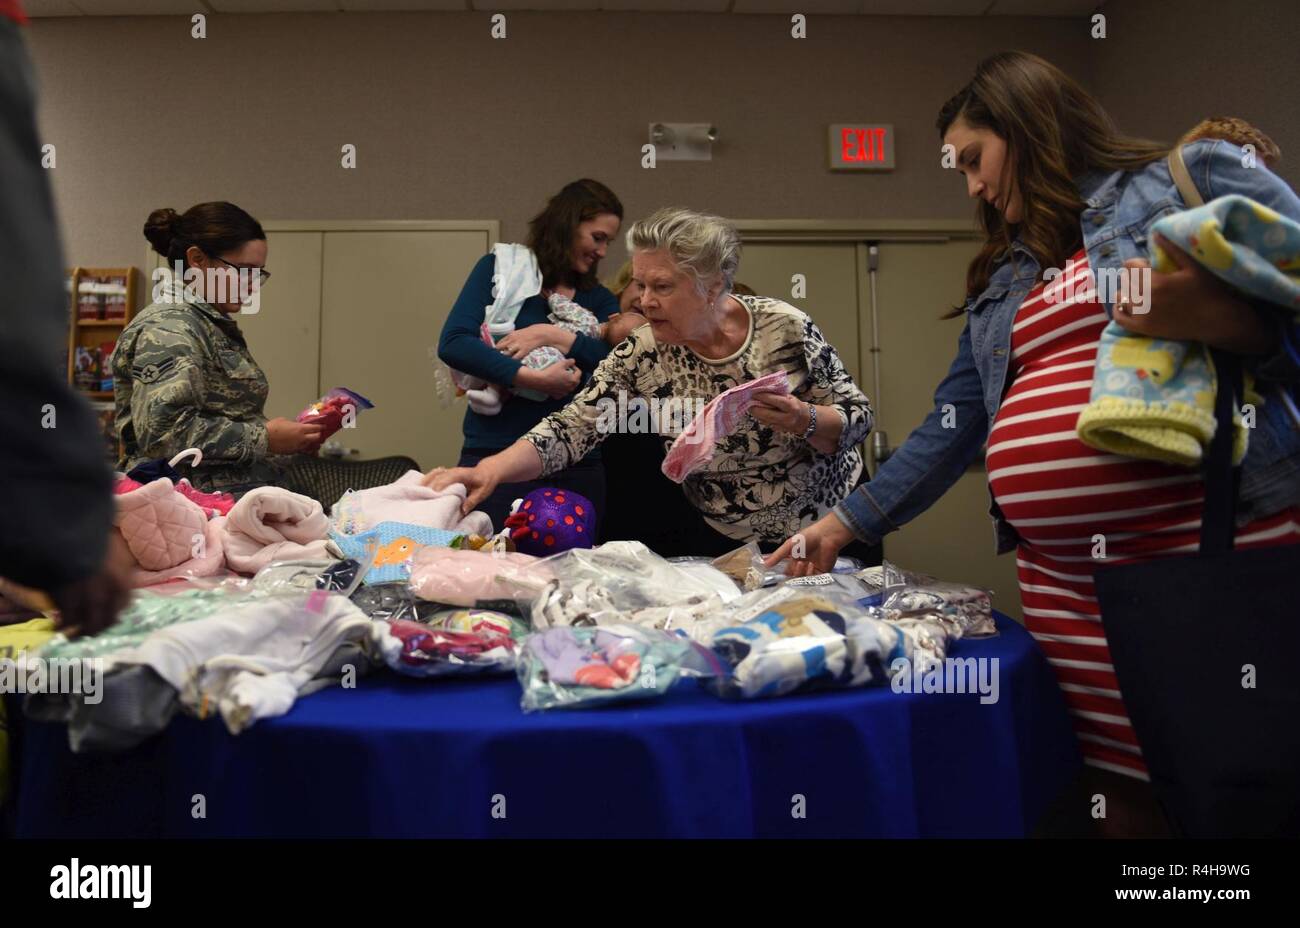 Michelle Davis, an expectant mother, looks at information pamphlets during Bundles for Babies at Beale Air Force Base, California, Sept. 20, 2018. Attendees received financial and budgeting advice for their new baby, as well as a $50 Army Air Force Exchange Service Gift Card provided by the Air Force Aid Society. Stock Photo